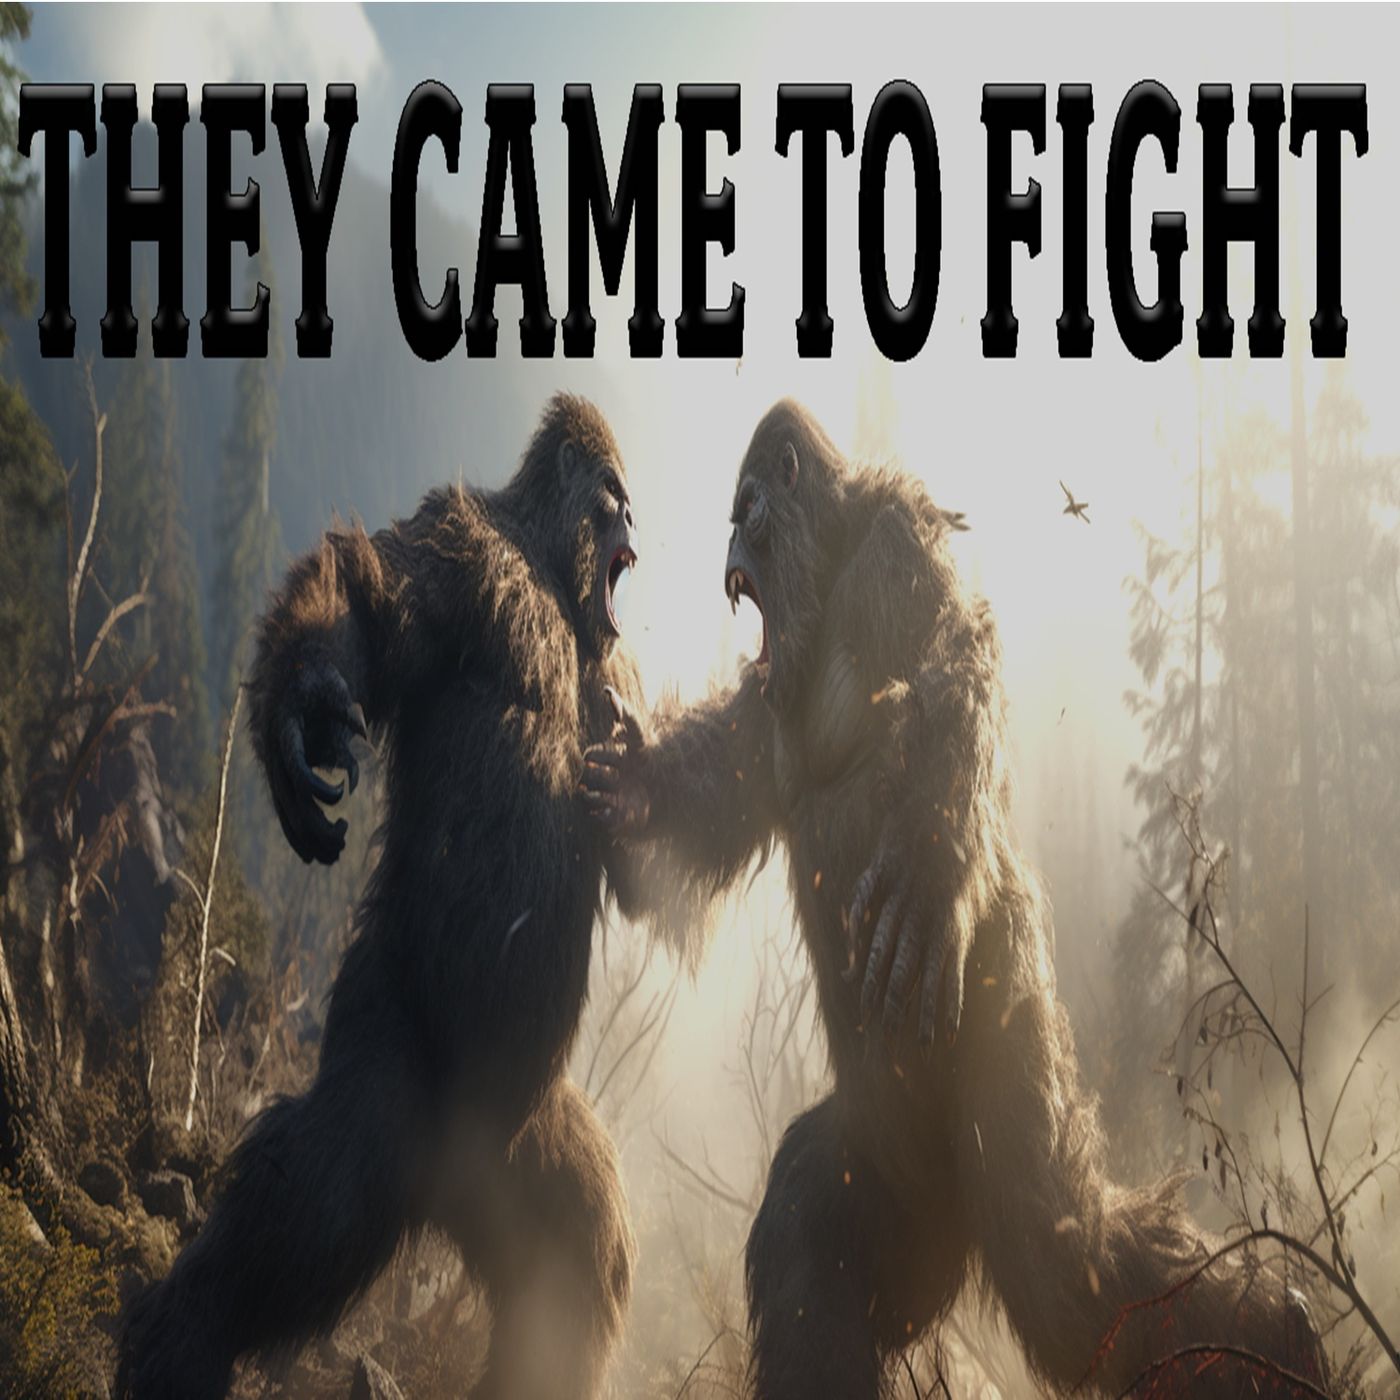 Bigfoot Came to Fight and a Man's Escape From Certain Death